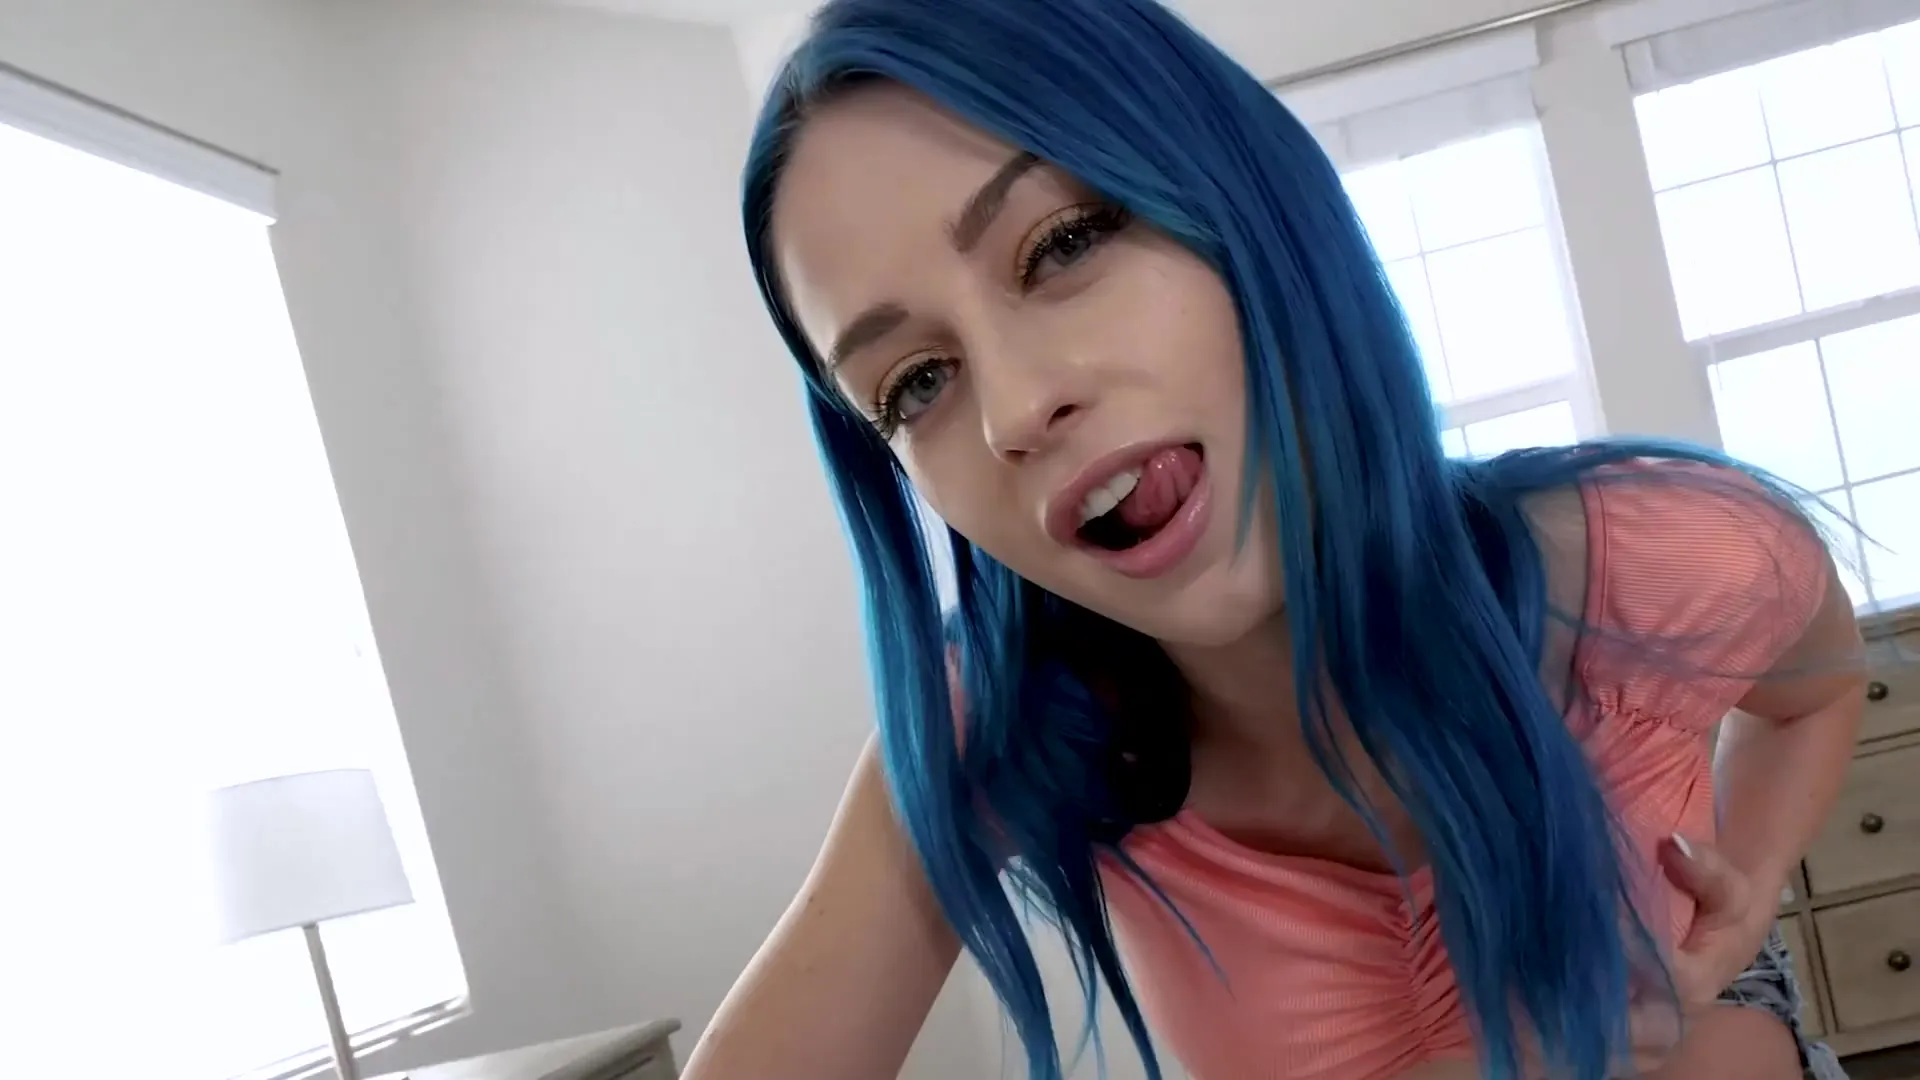 Blue Hair Girl Pov Porn - Blue haired girl blows cock and fucks hard in POV. Round butt looks awesome!